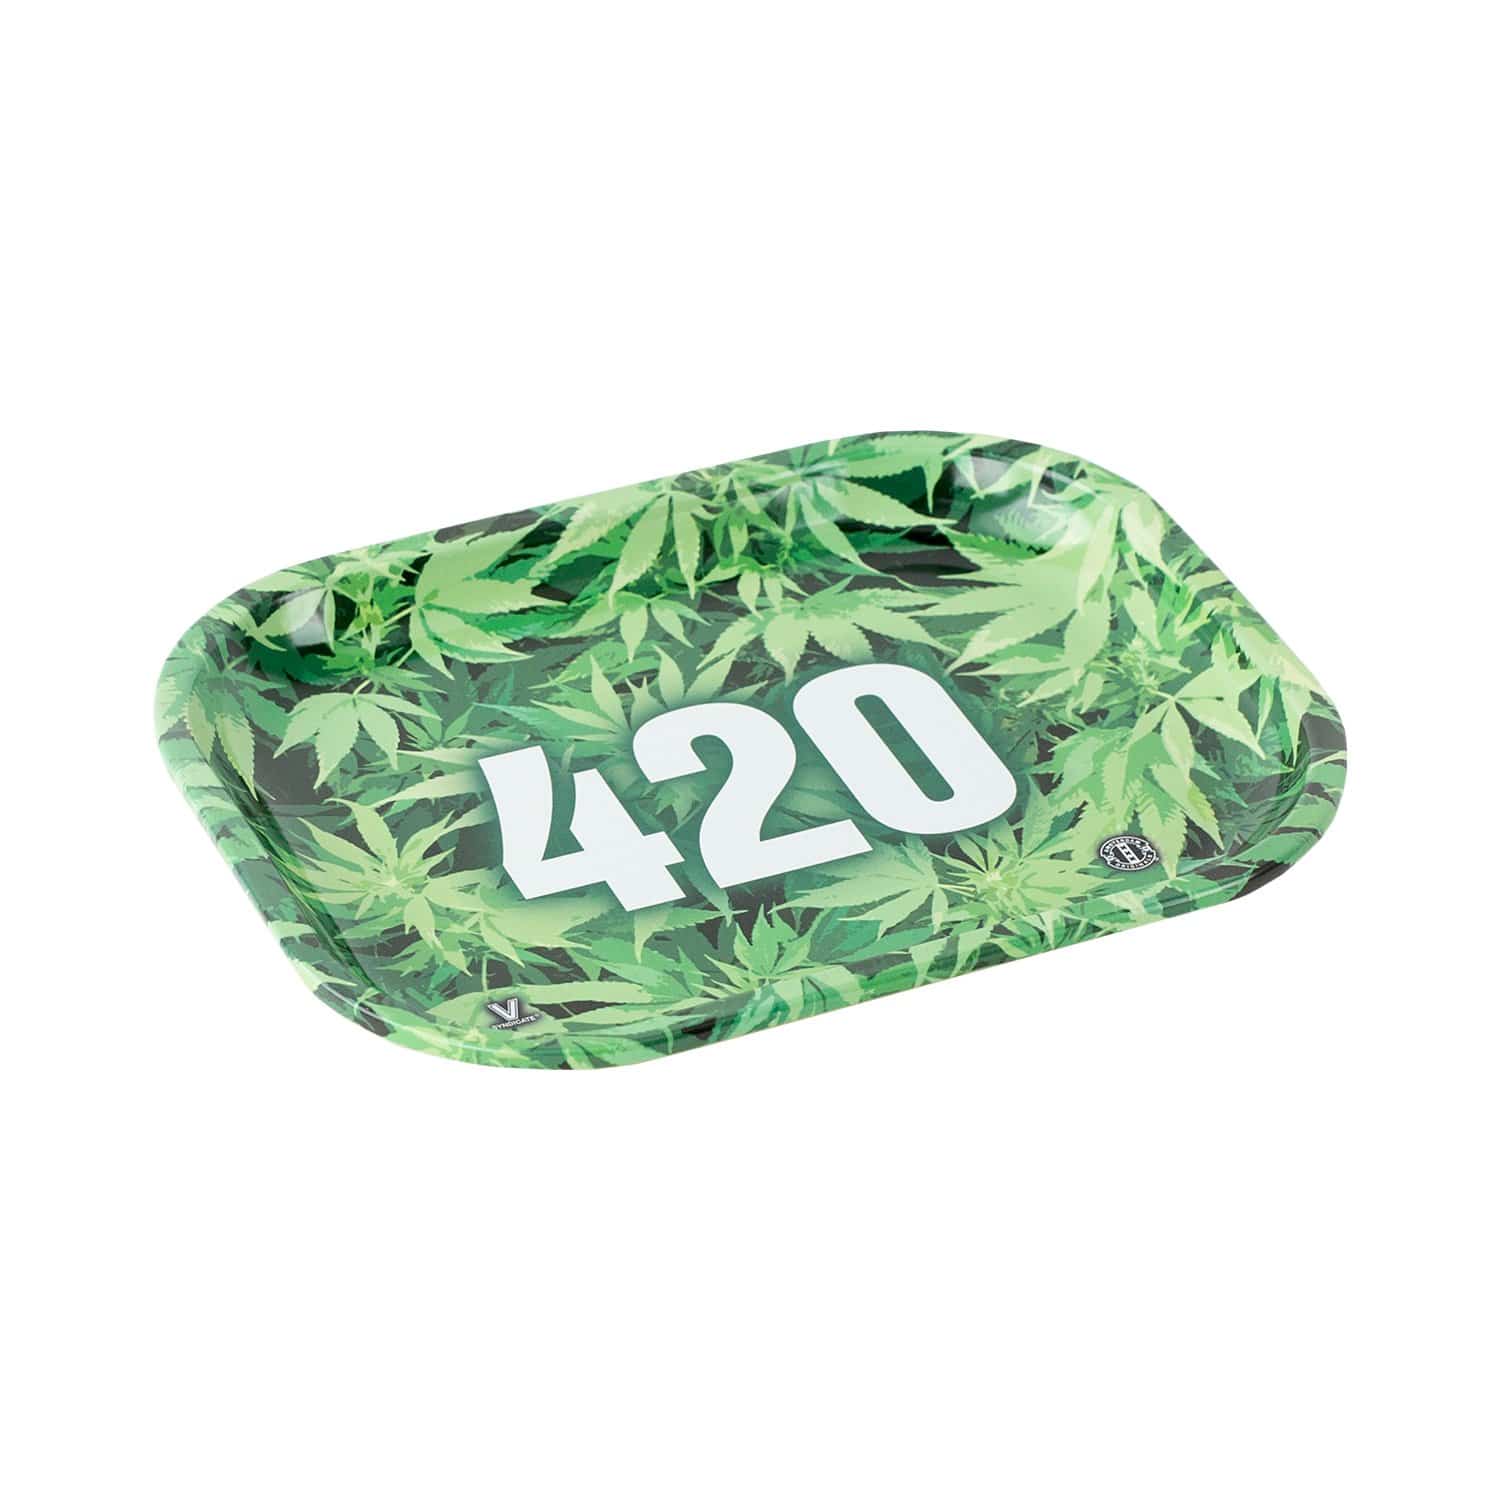 green weed 420 square rolling tray mini